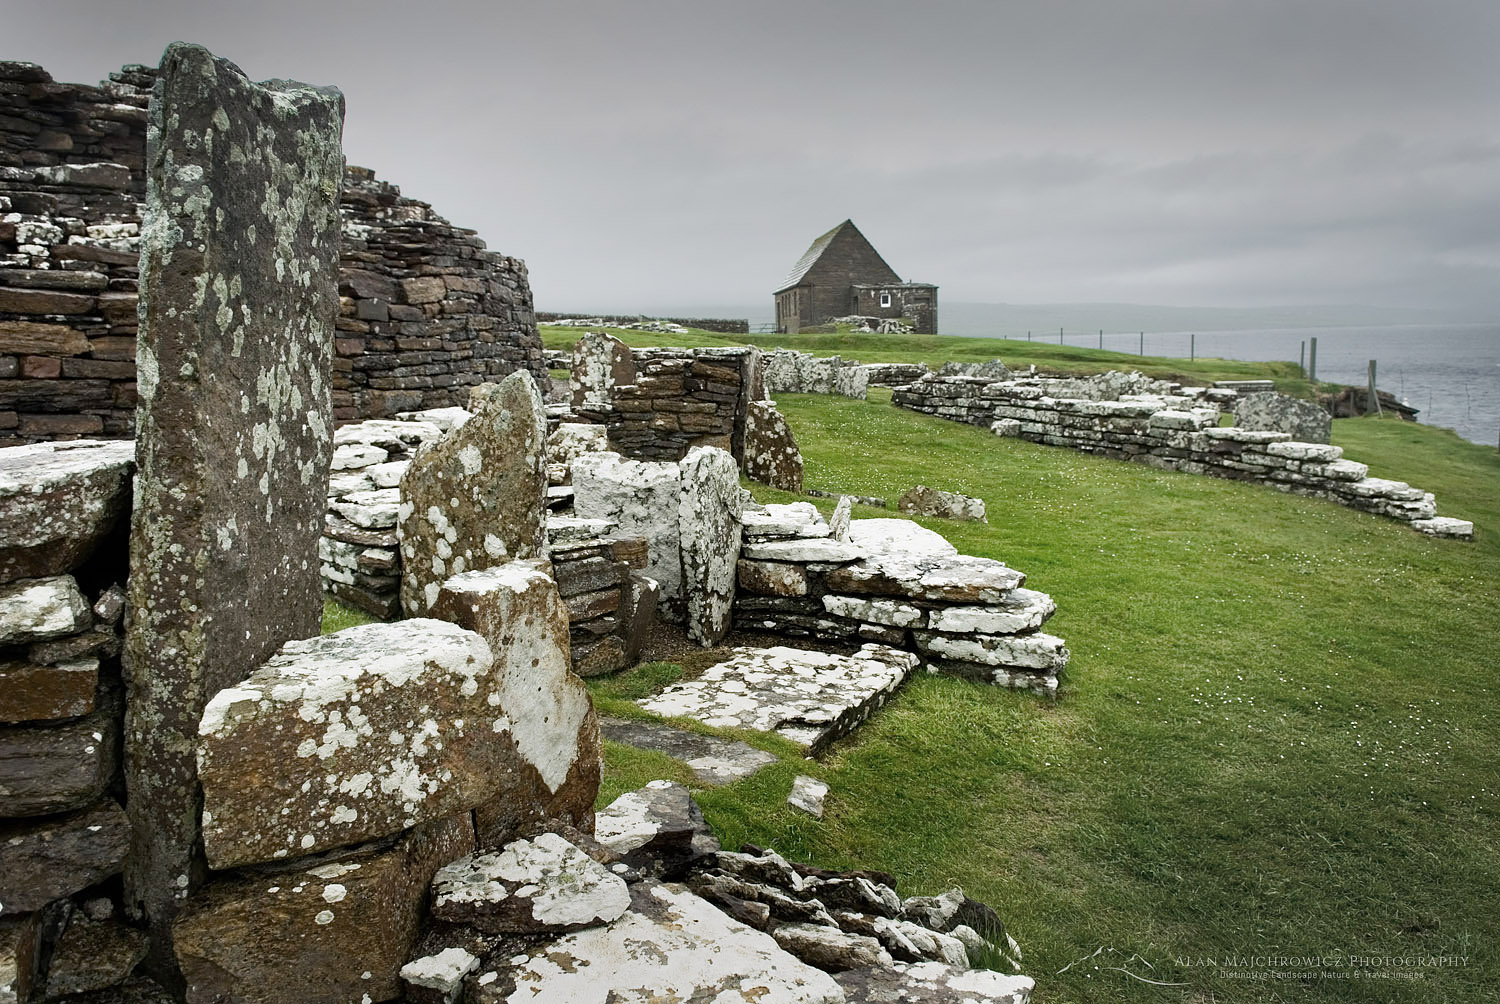 Broch of Gurness, a fortified dwelling dating back to the Iron Age around 2000 BC, Orkney Islands Scotland #12259r